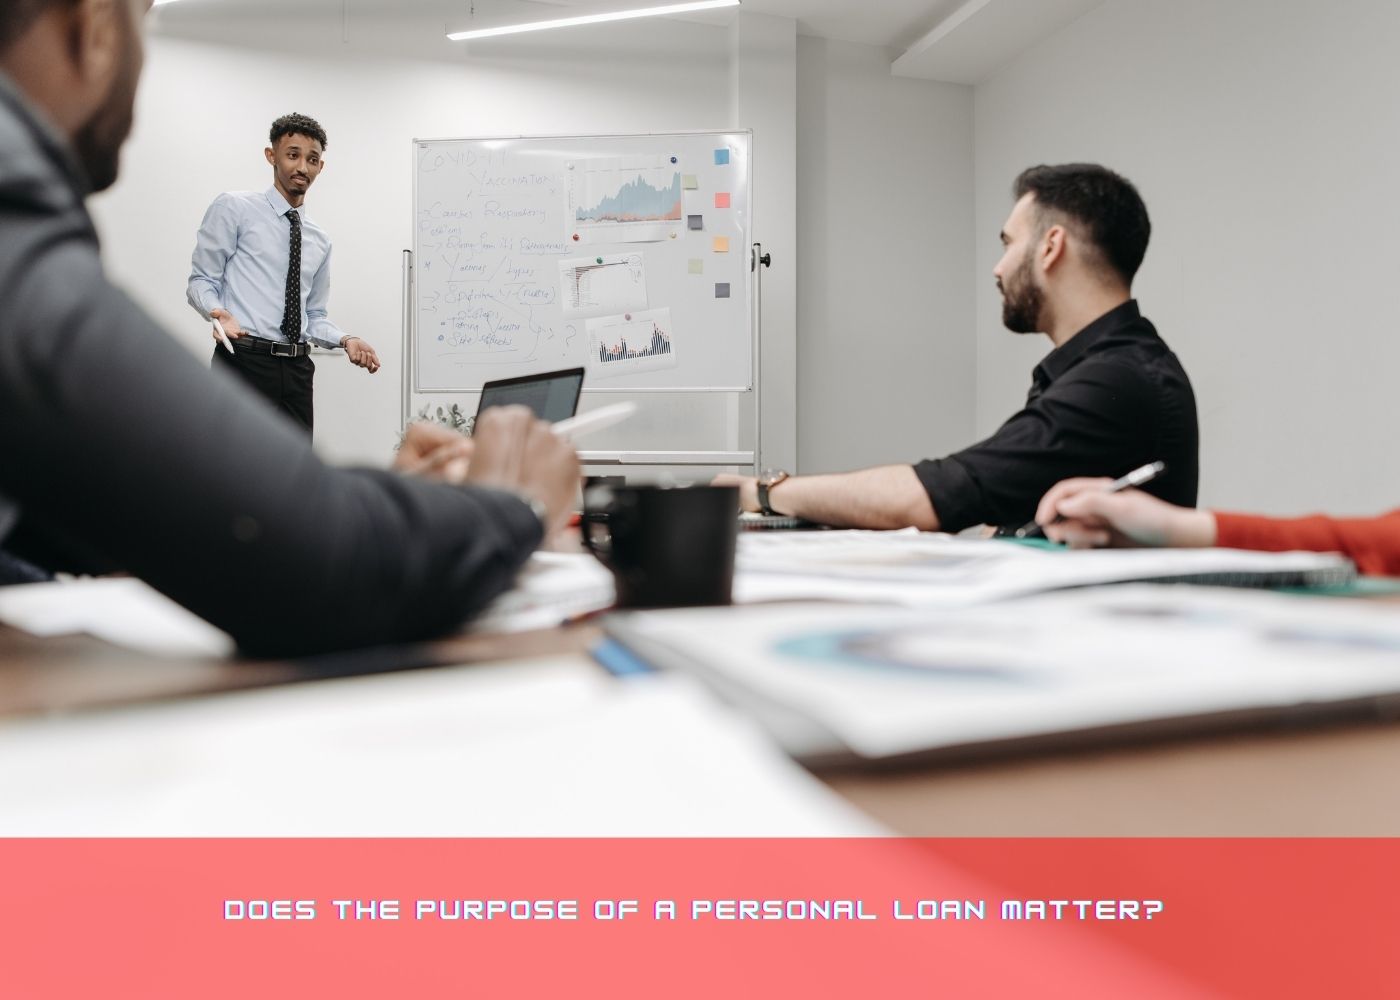 Does the purpose of a Personal Loan matter? 